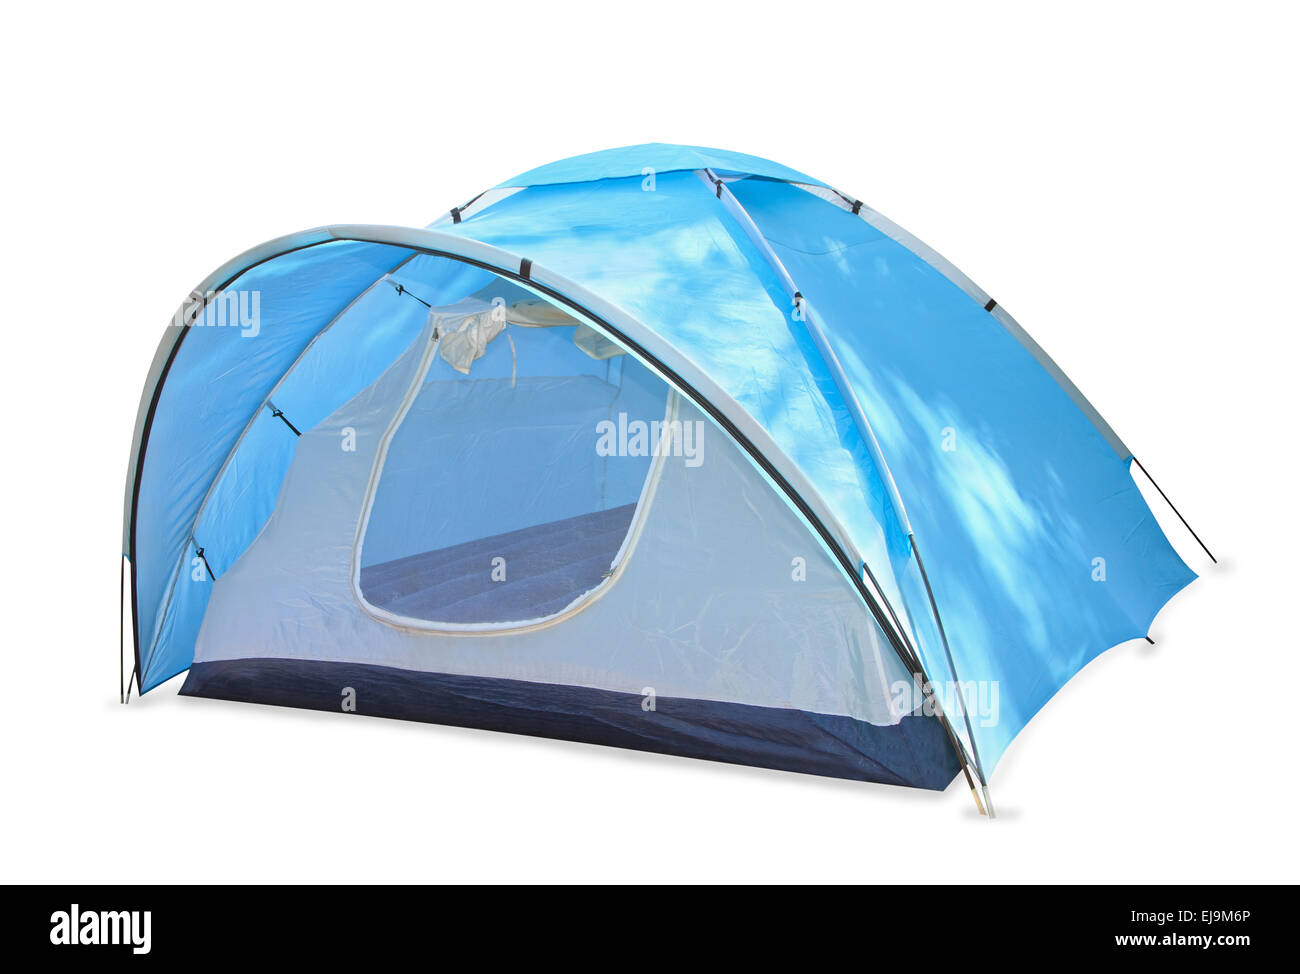 vreemd Mainstream Bridge pier Camping tent Cut Out Stock Images & Pictures - Alamy